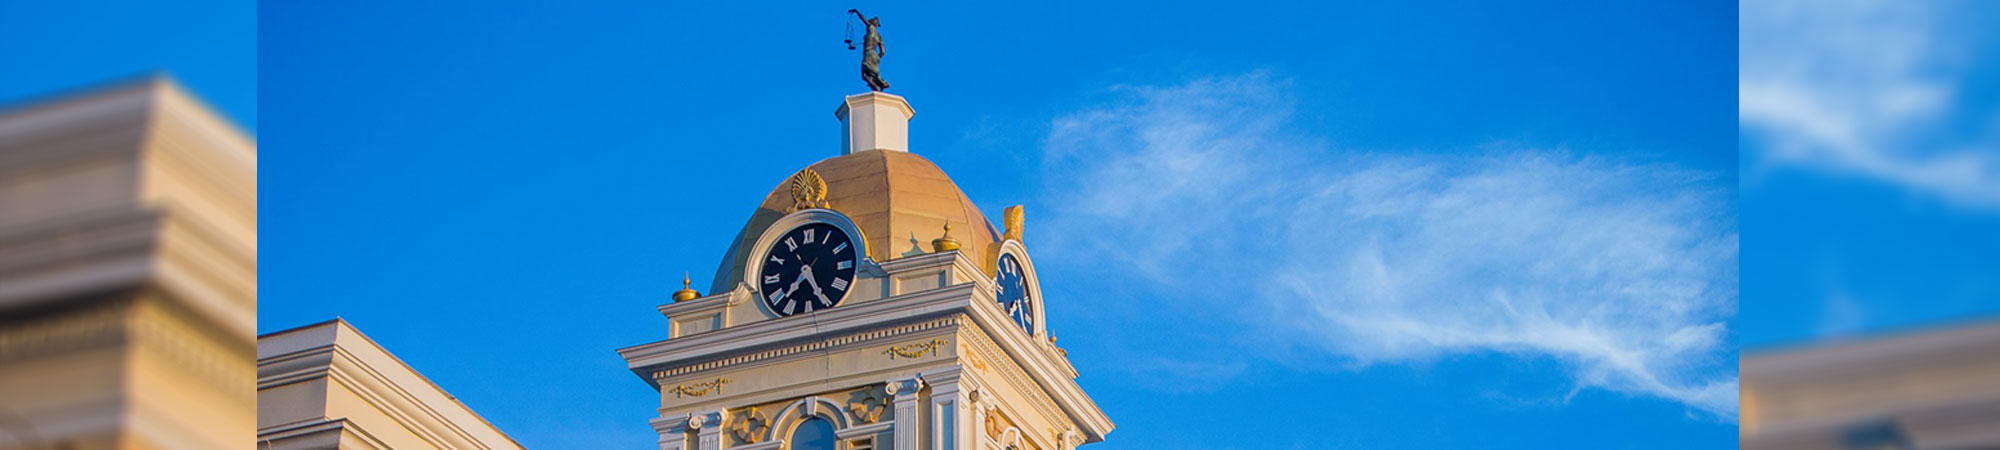 cupola with clock on top of courthouse